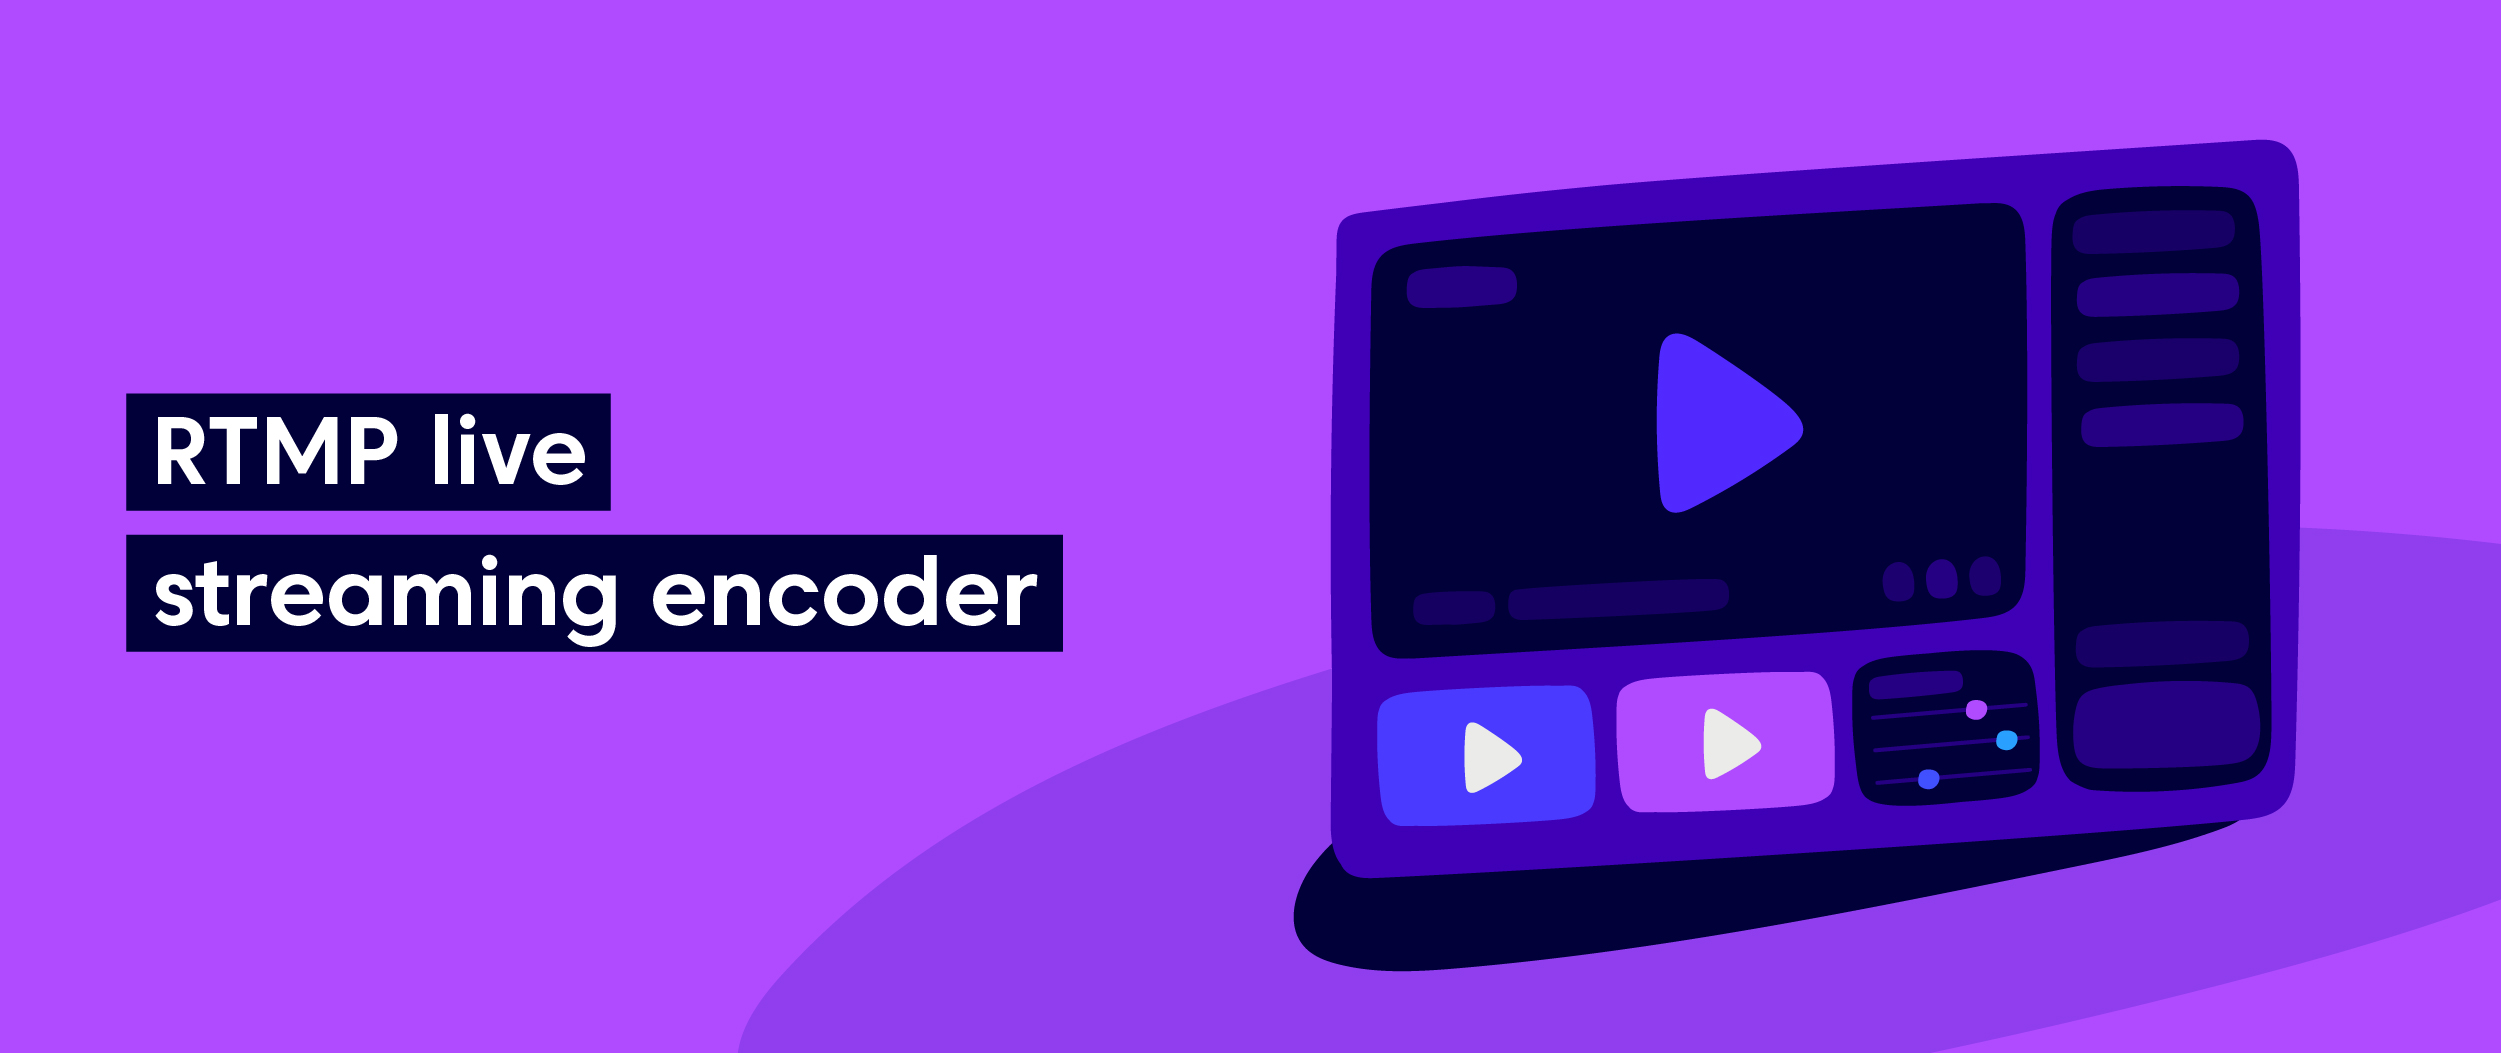 What is an RTMP live Streaming Encoder?